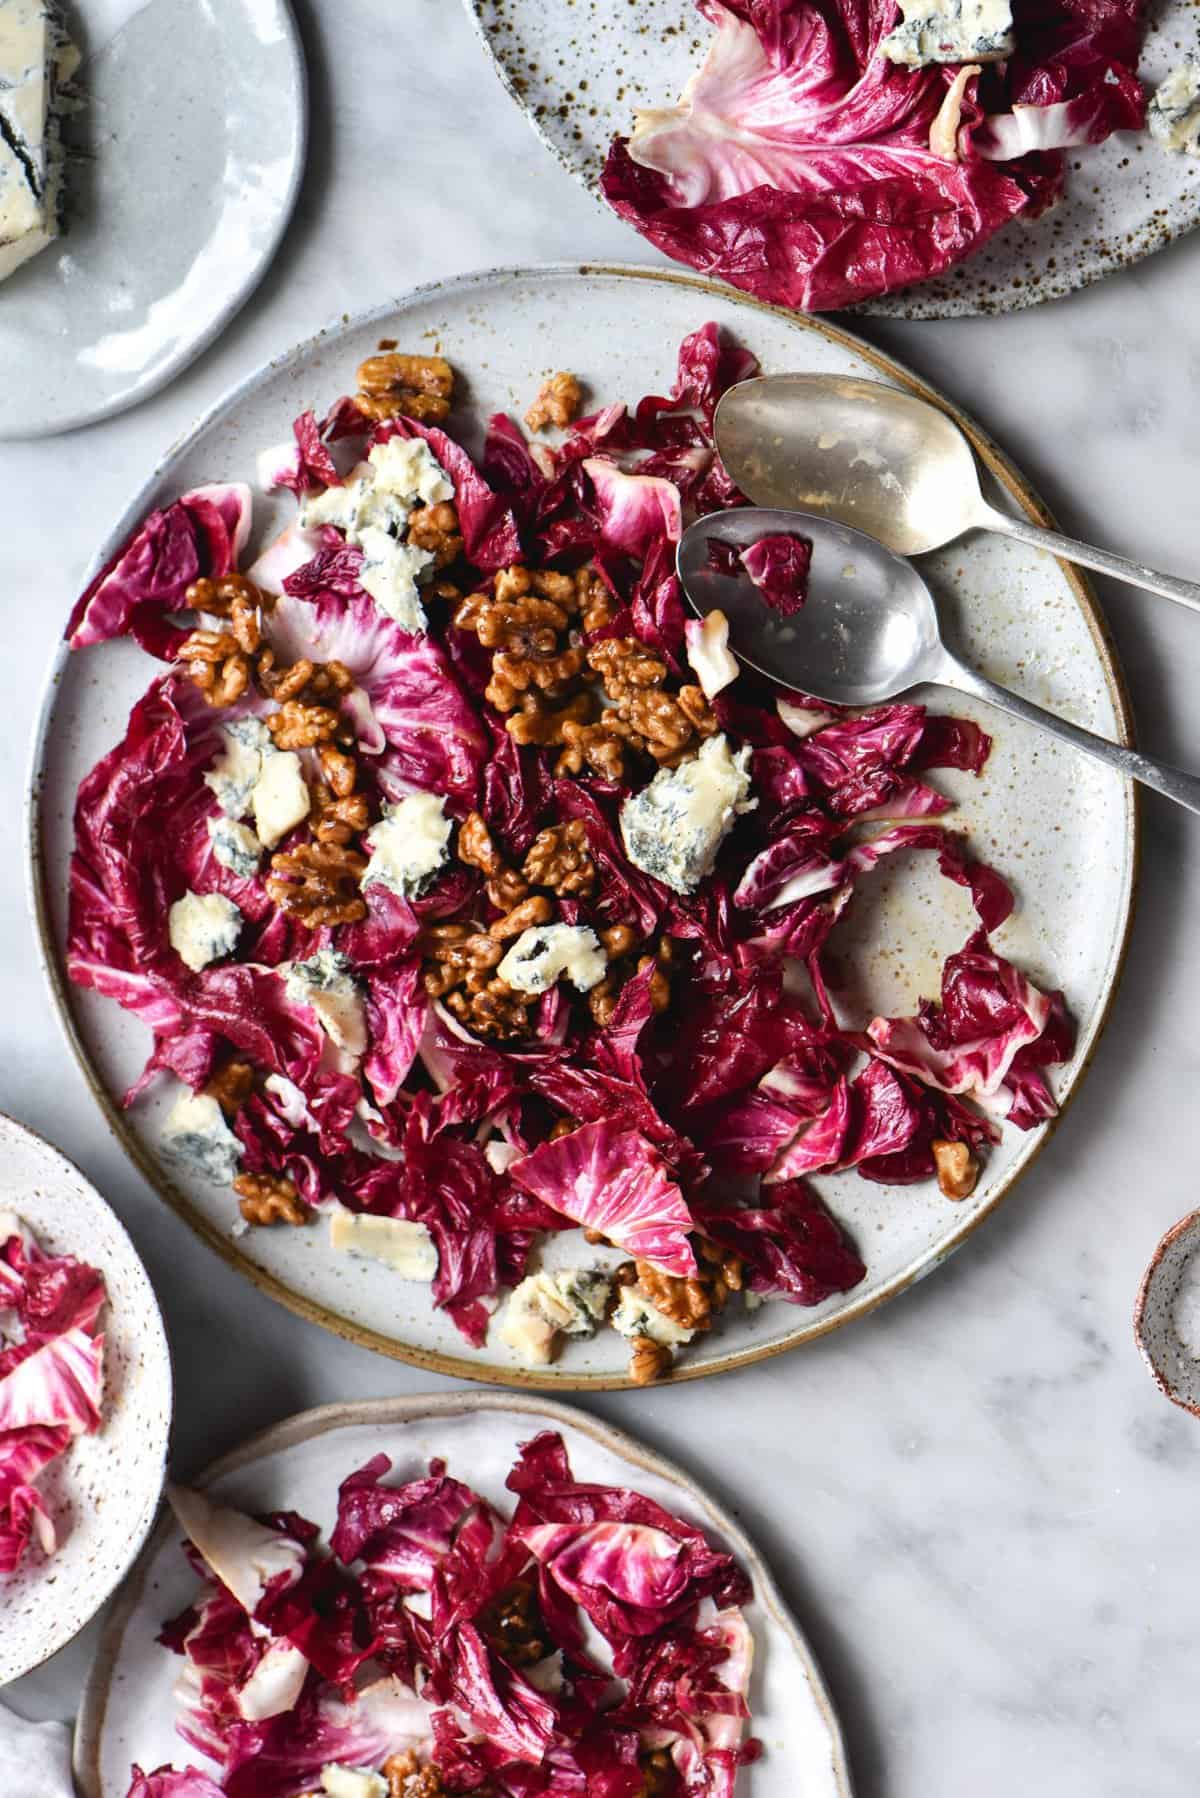 Radicchio salad with blue cheese, honey cinnamon walnuts and a low FODMAP salad dressing on a white marble backdrop